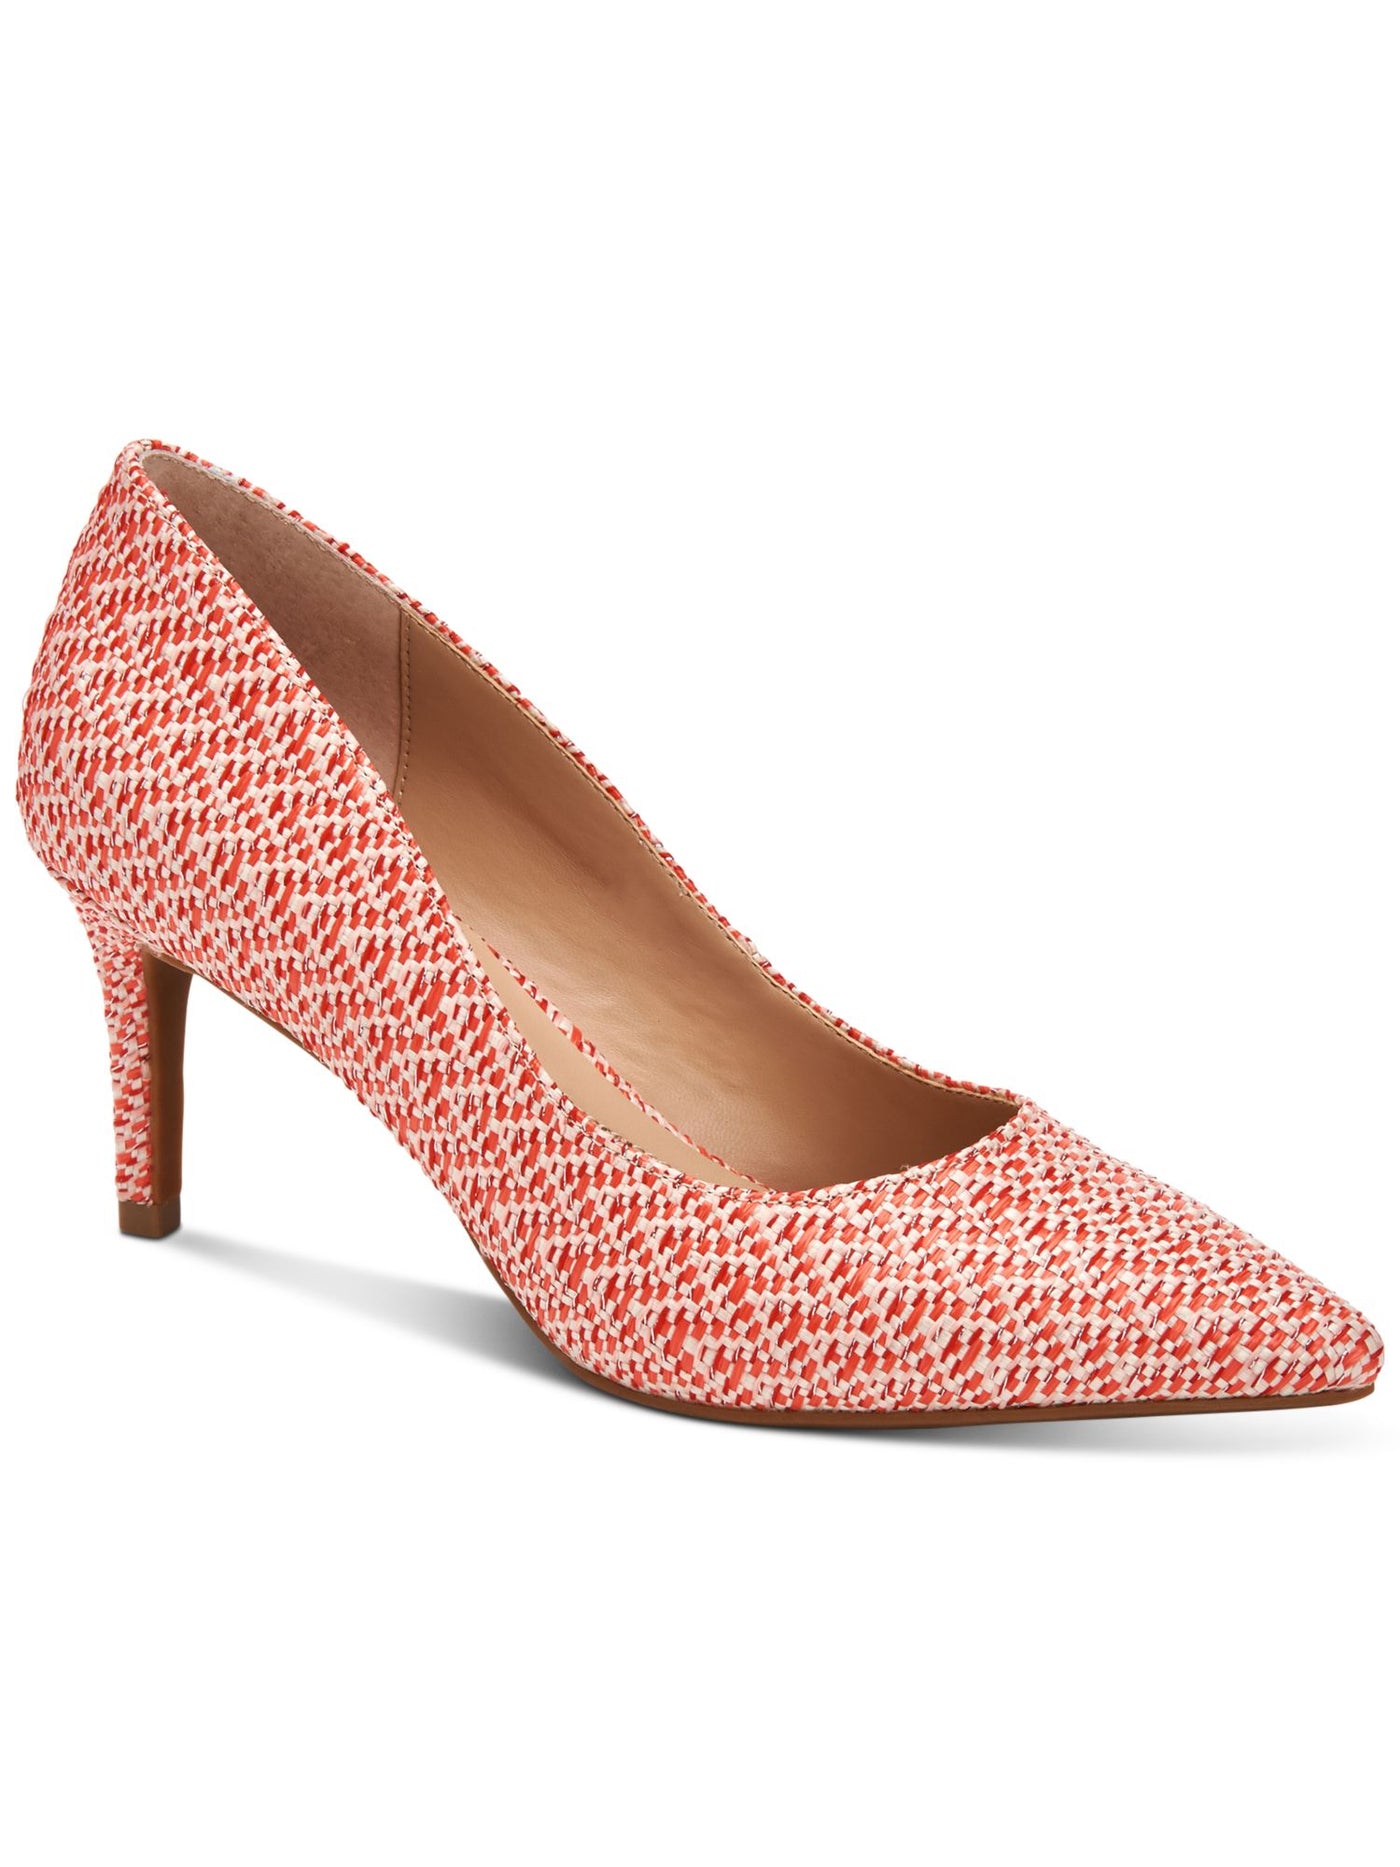 ALFANI Womens Coral Woven Padded Comfort Jeules Pointed Toe Stiletto Slip On Pumps Shoes 5 M